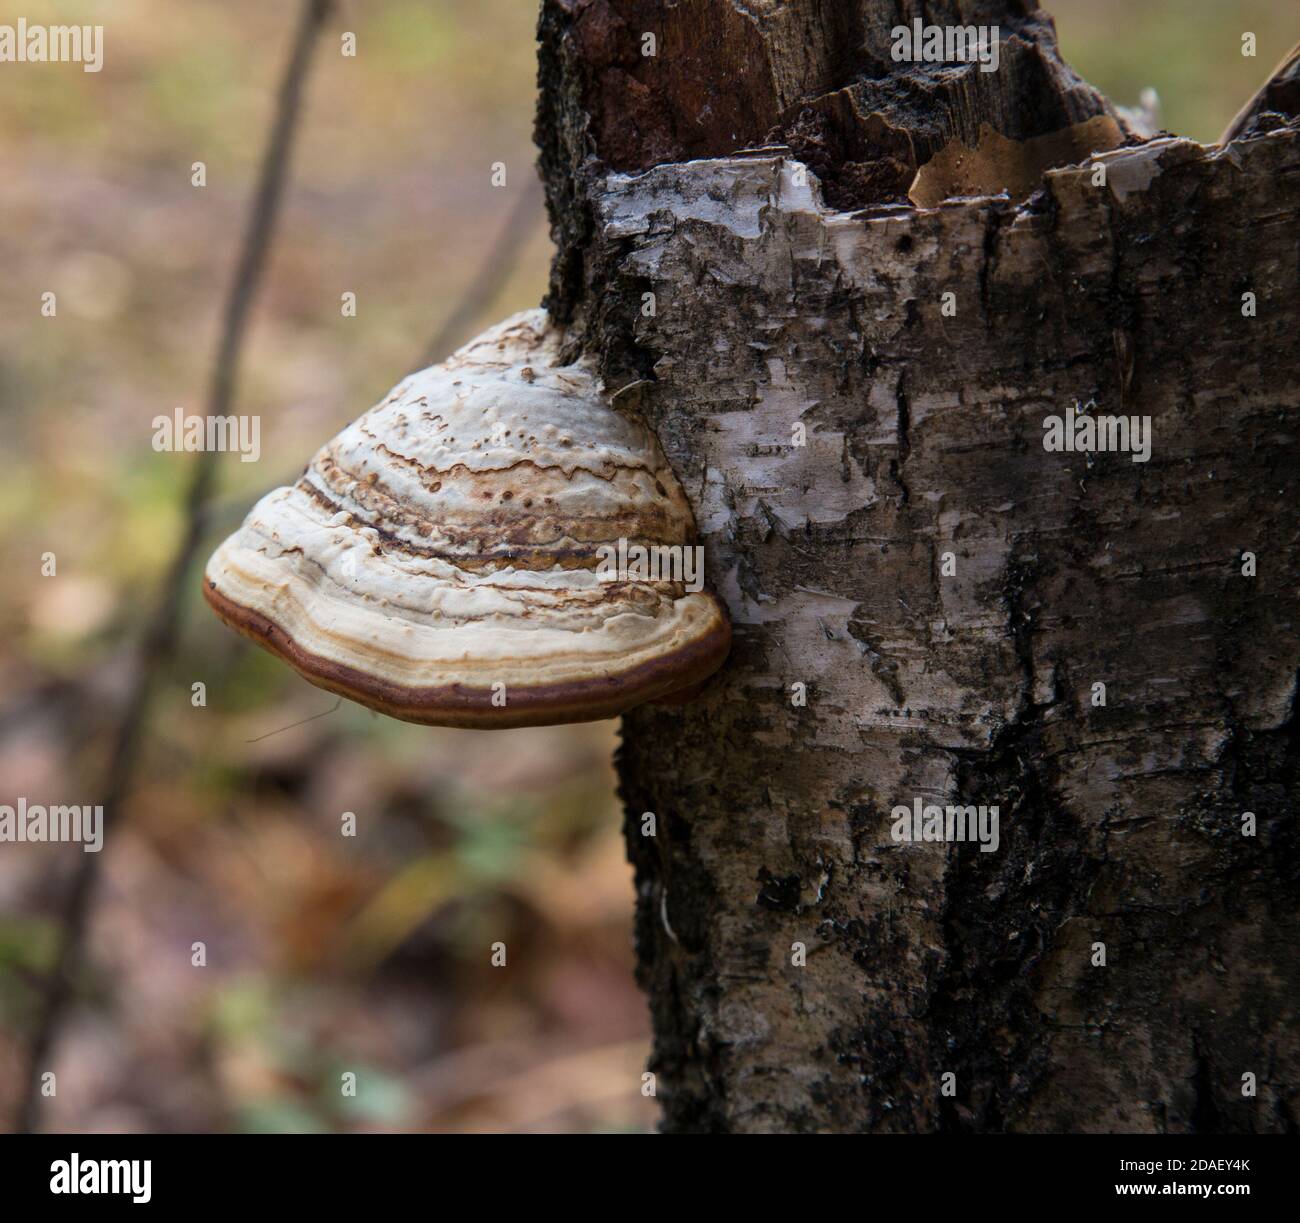 polyporus one over the other mushroom specific species on a dead tree trunk Stock Photo